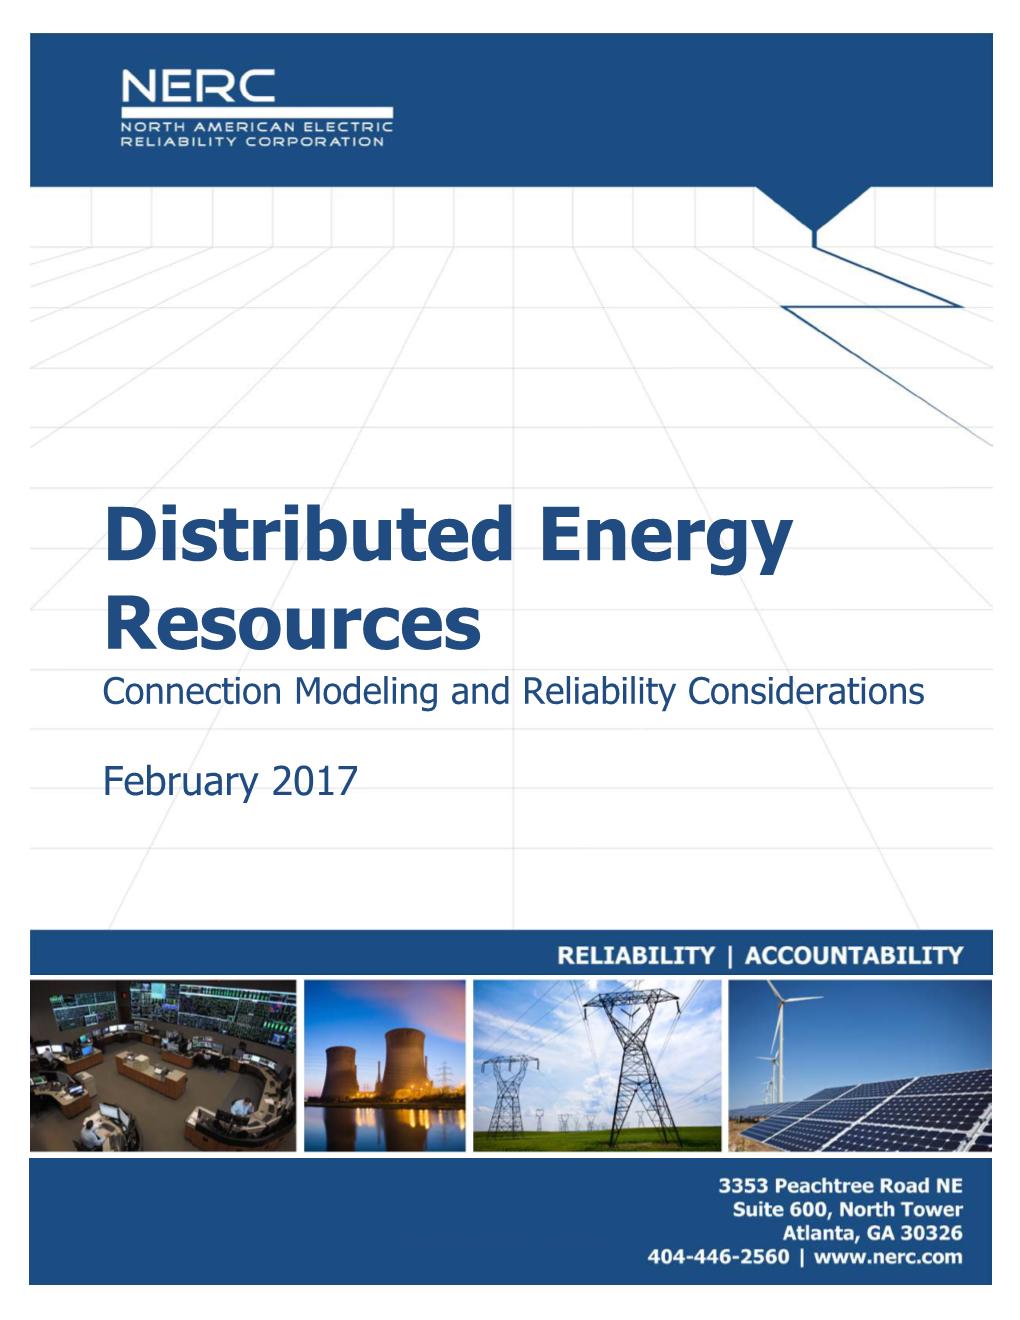 Distributed Energy Resources Connection Modeling and Reliability Considerations